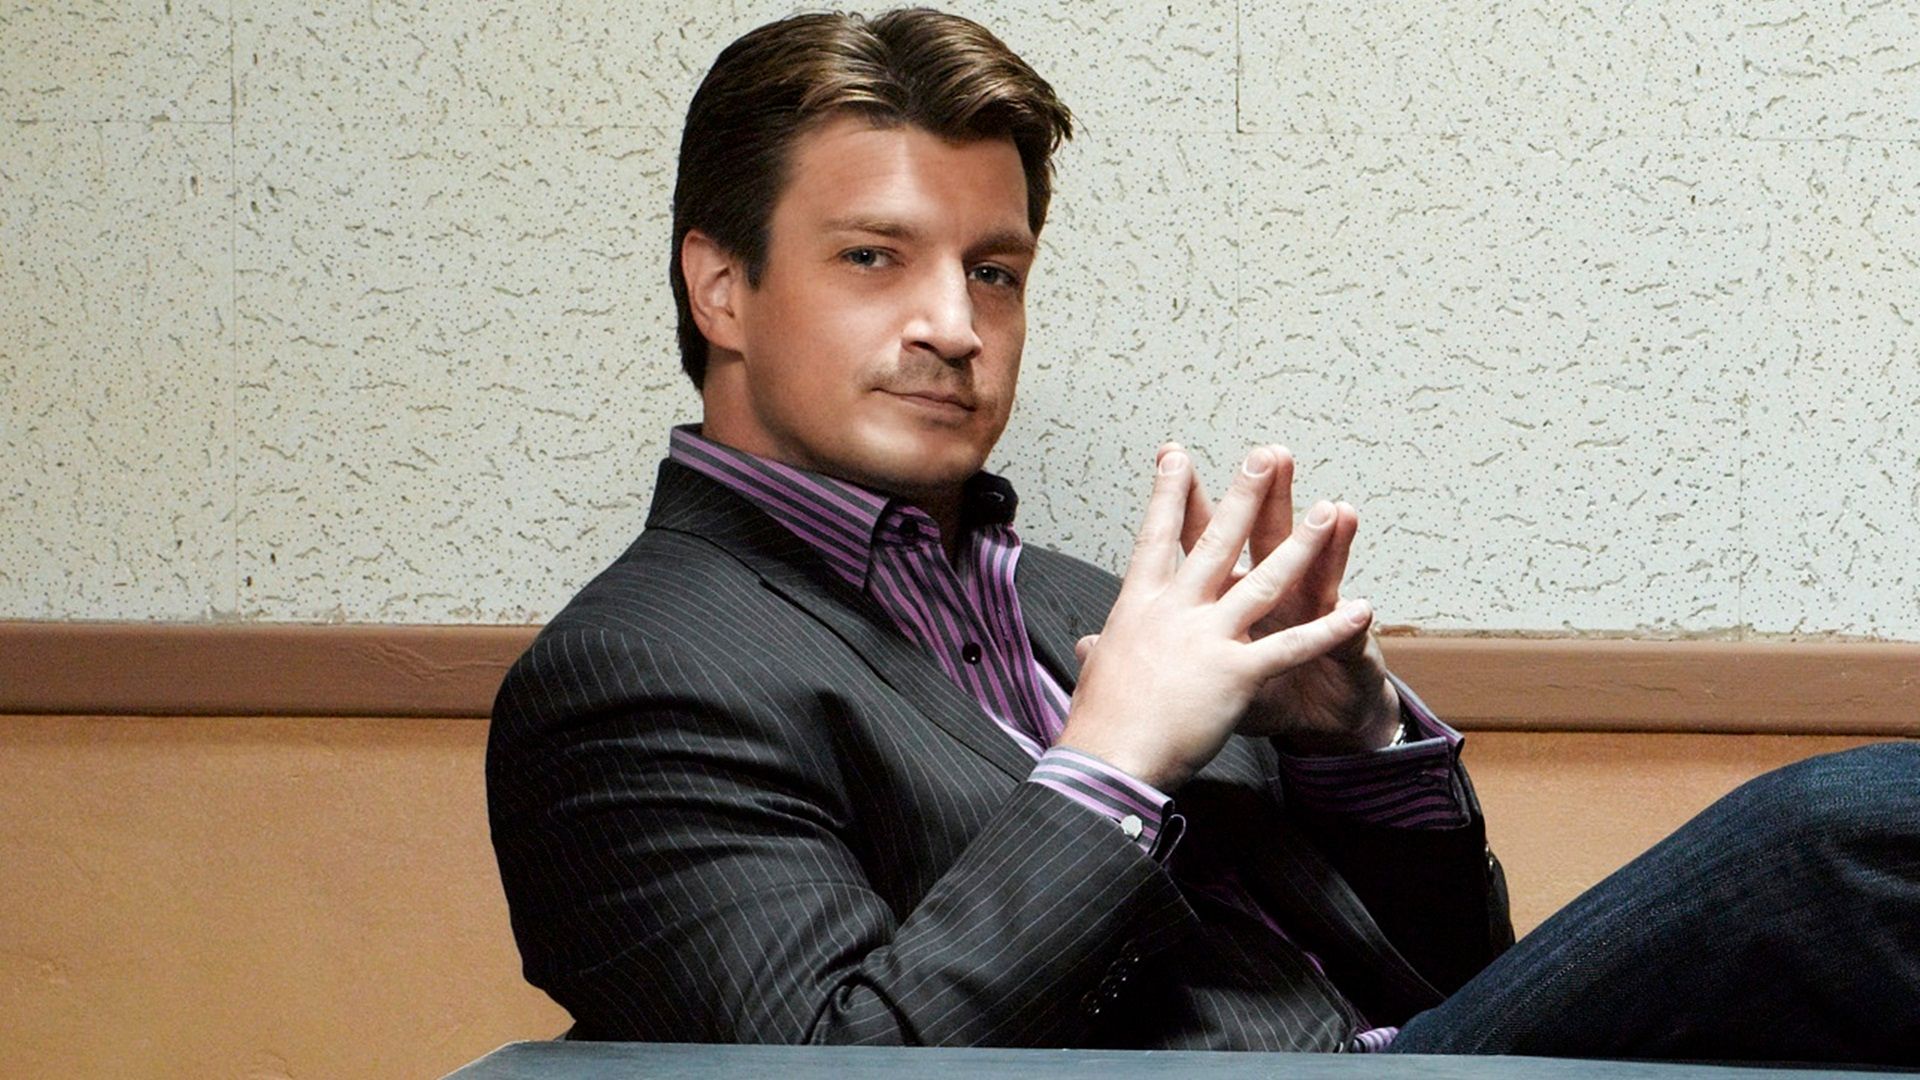 Nathan Fillion Gets Down to Business in Cars 3. Den of Geek